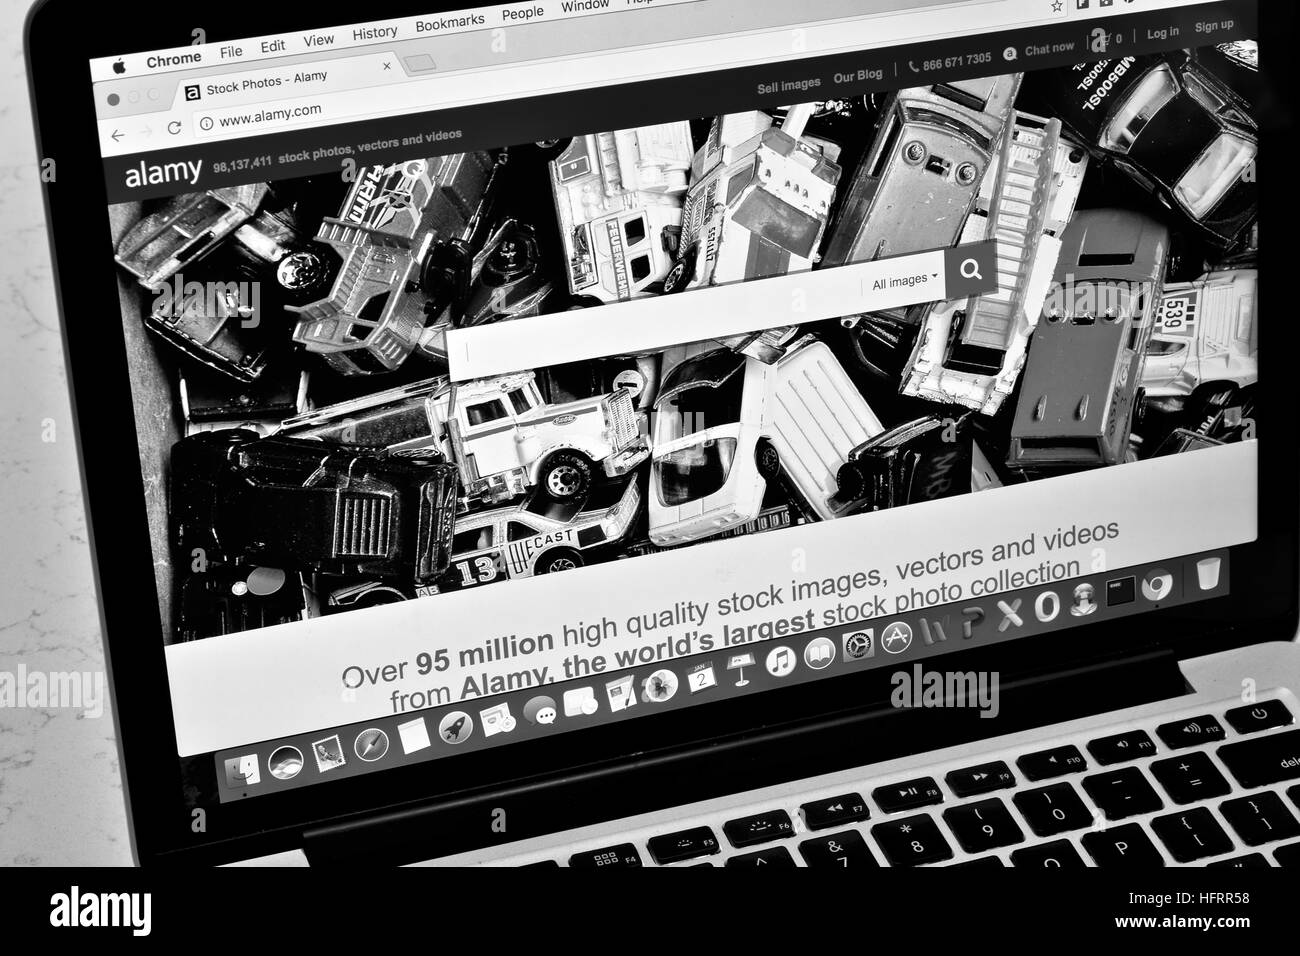 An Apple Macbook Pro displaying the Alamy stock photo website in black and white Stock Photo